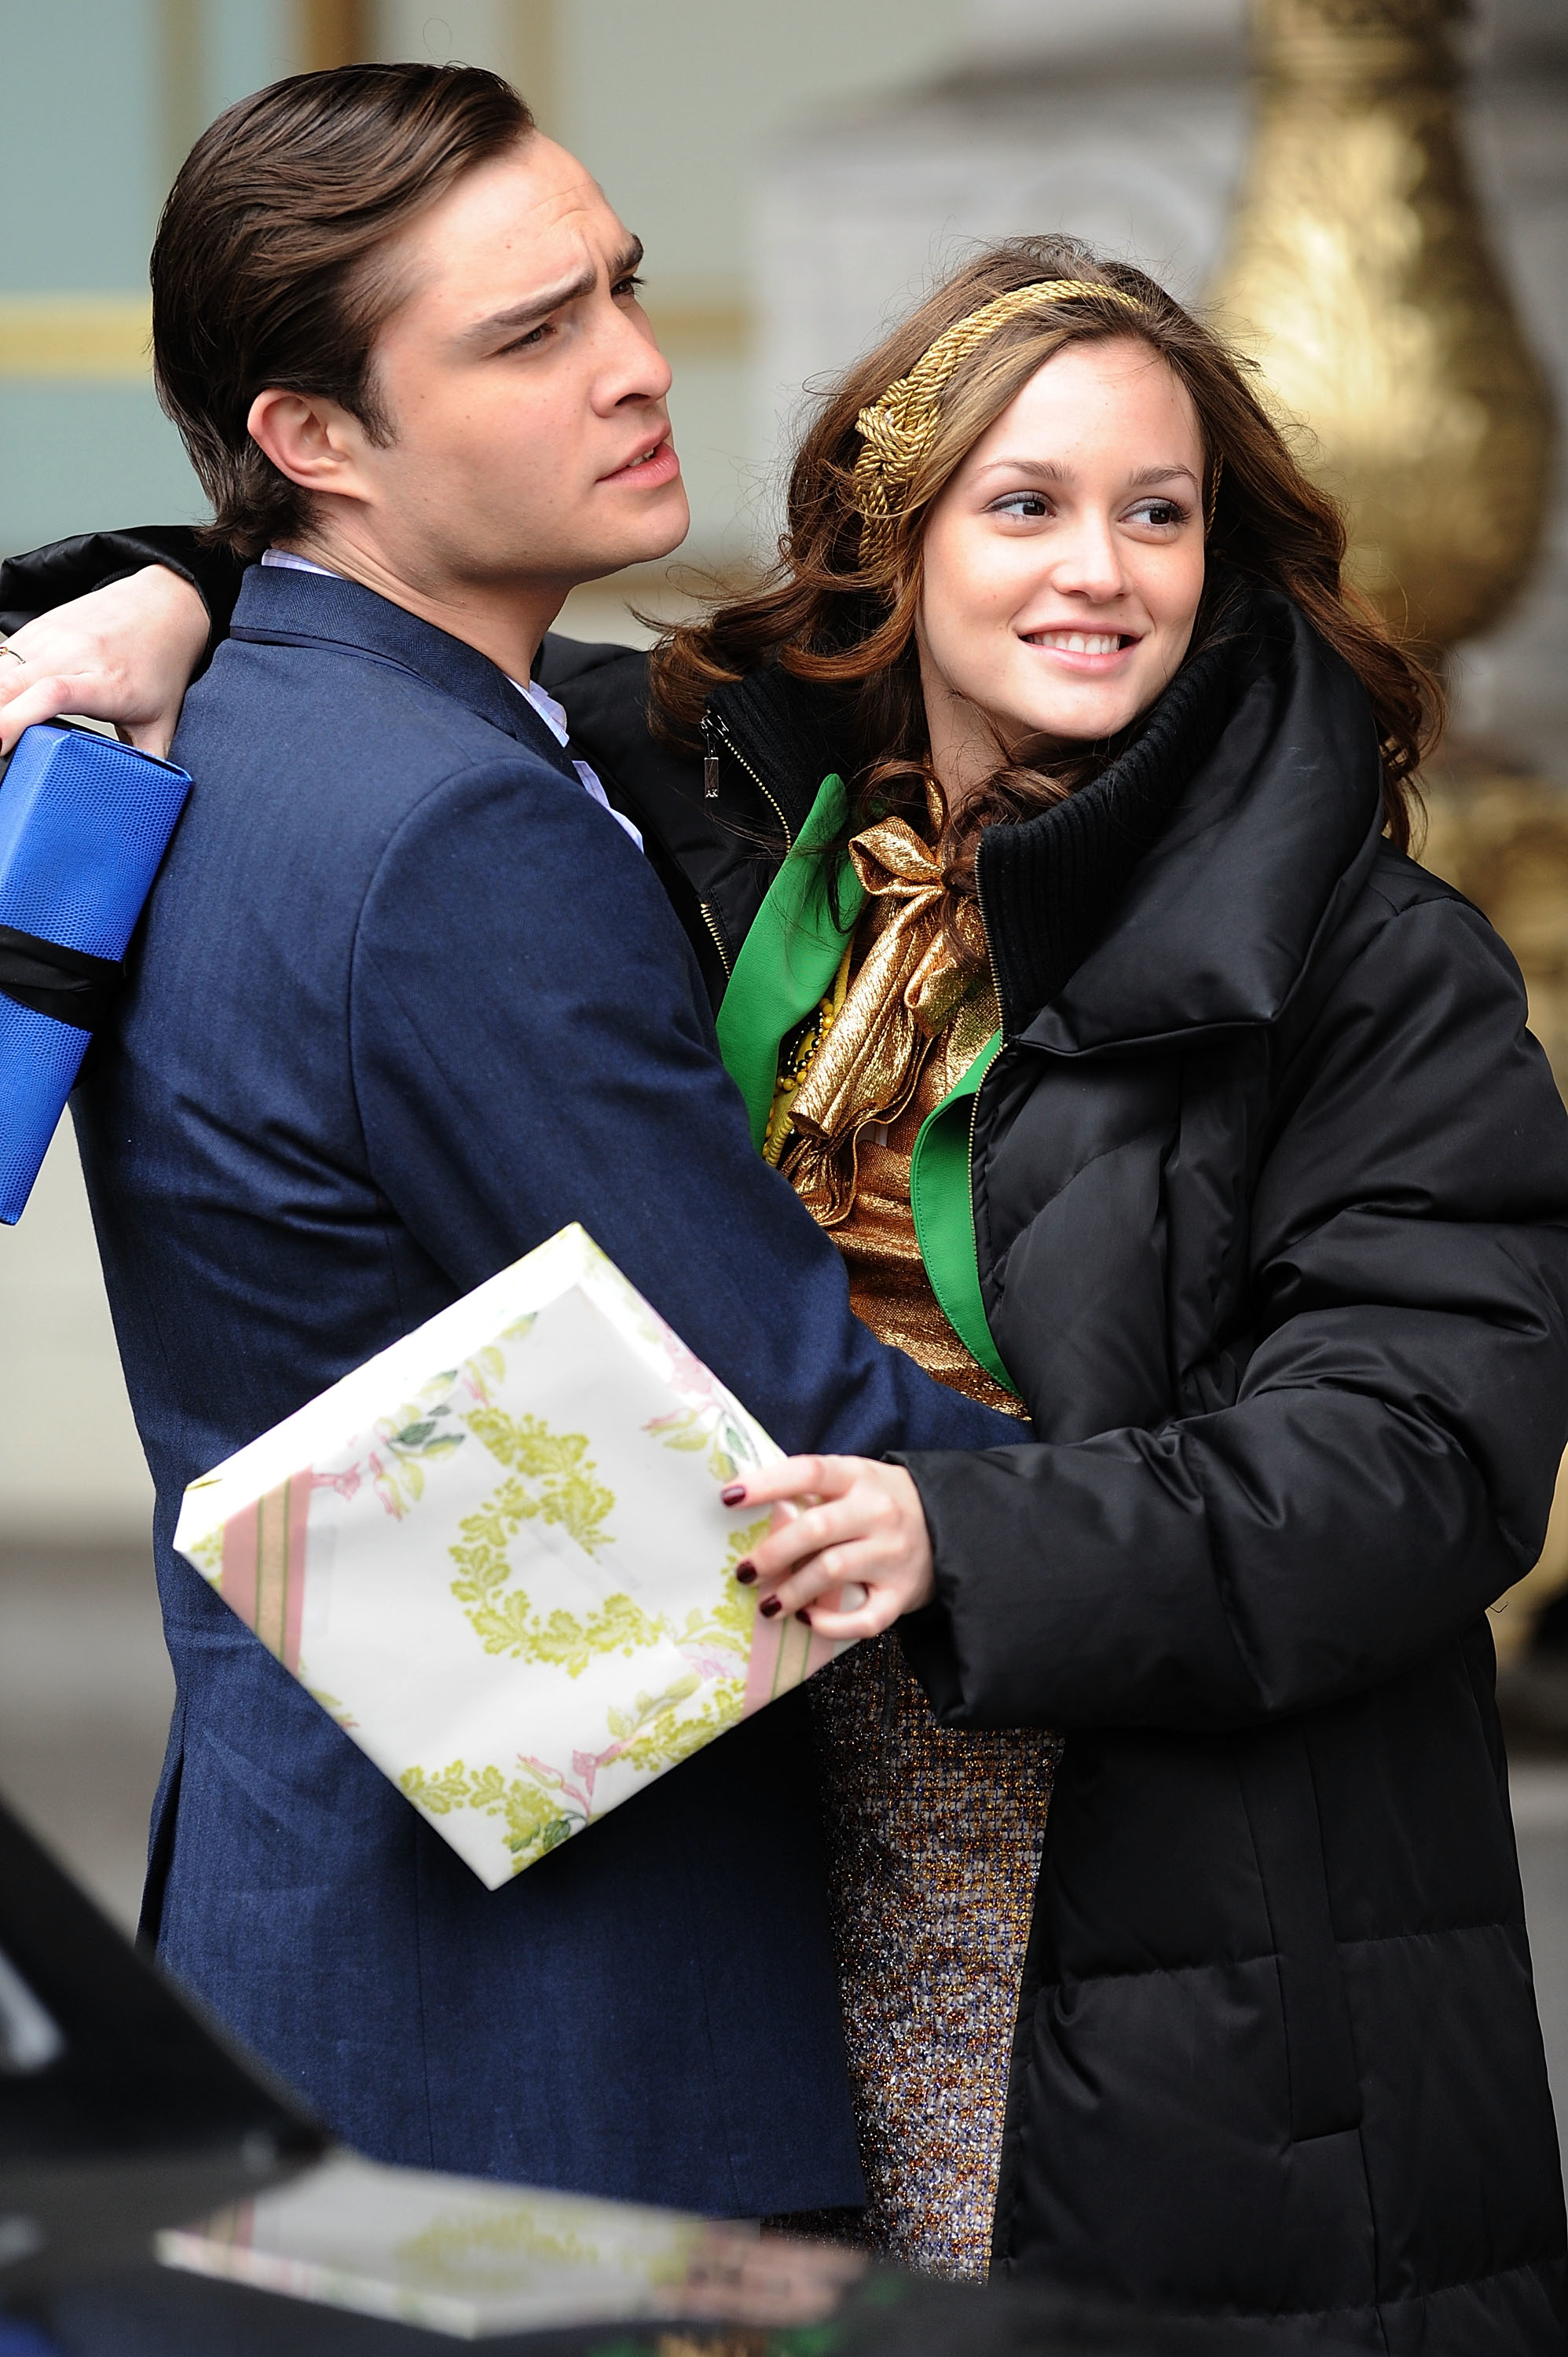 Chuck Bass and Blair Waldorf from Gossip Girl in an outdoor scene, embracing and holding a gift